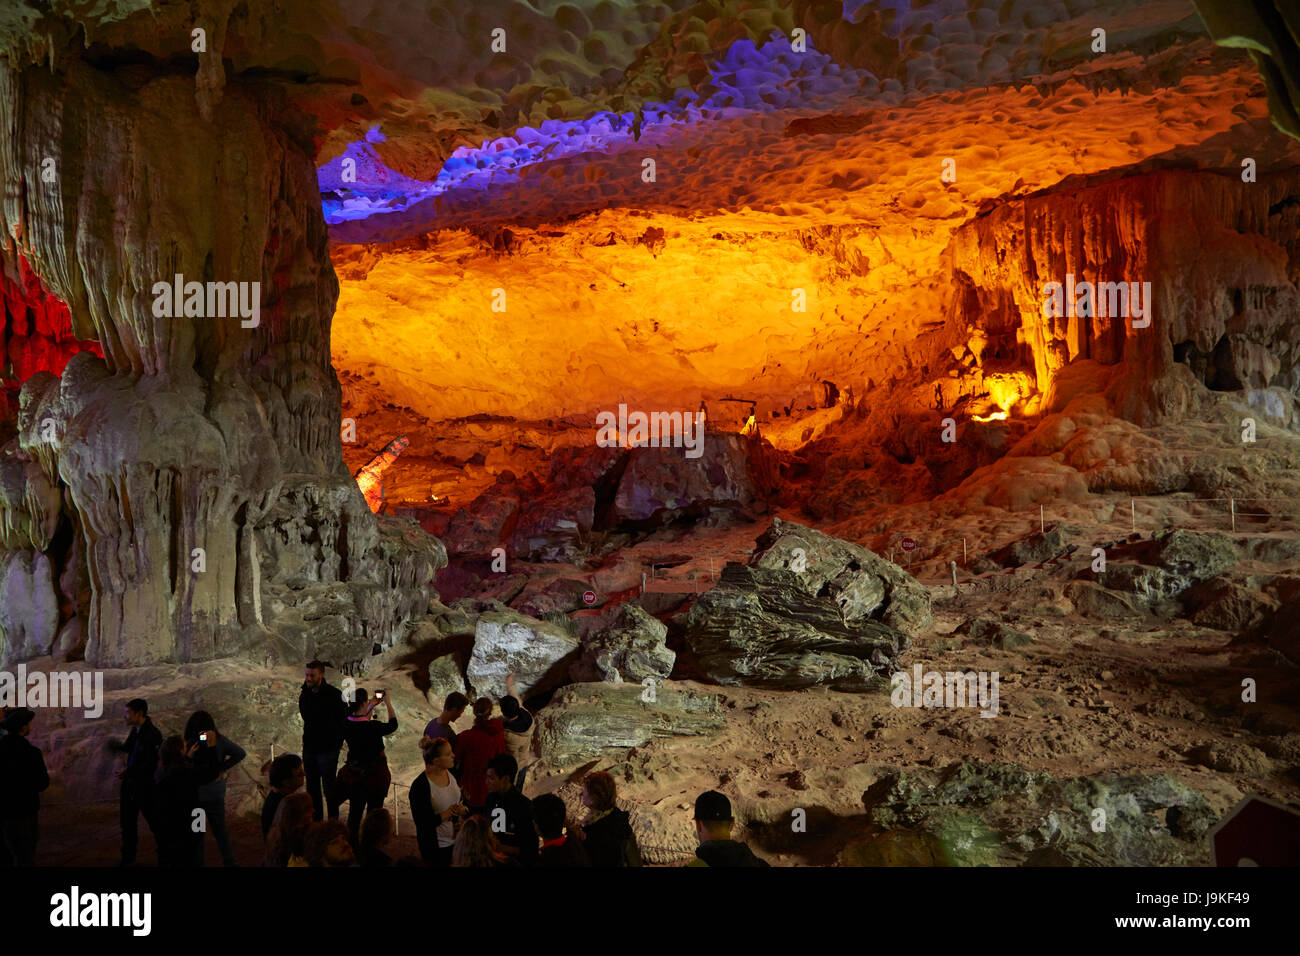 Limestone formations and tourists, Surprise Cave (Hang Sung Sot Cave), Ha Long Bay (UNESCO World Heritage Site ), Quang Ninh Province, Vietnam Stock Photo